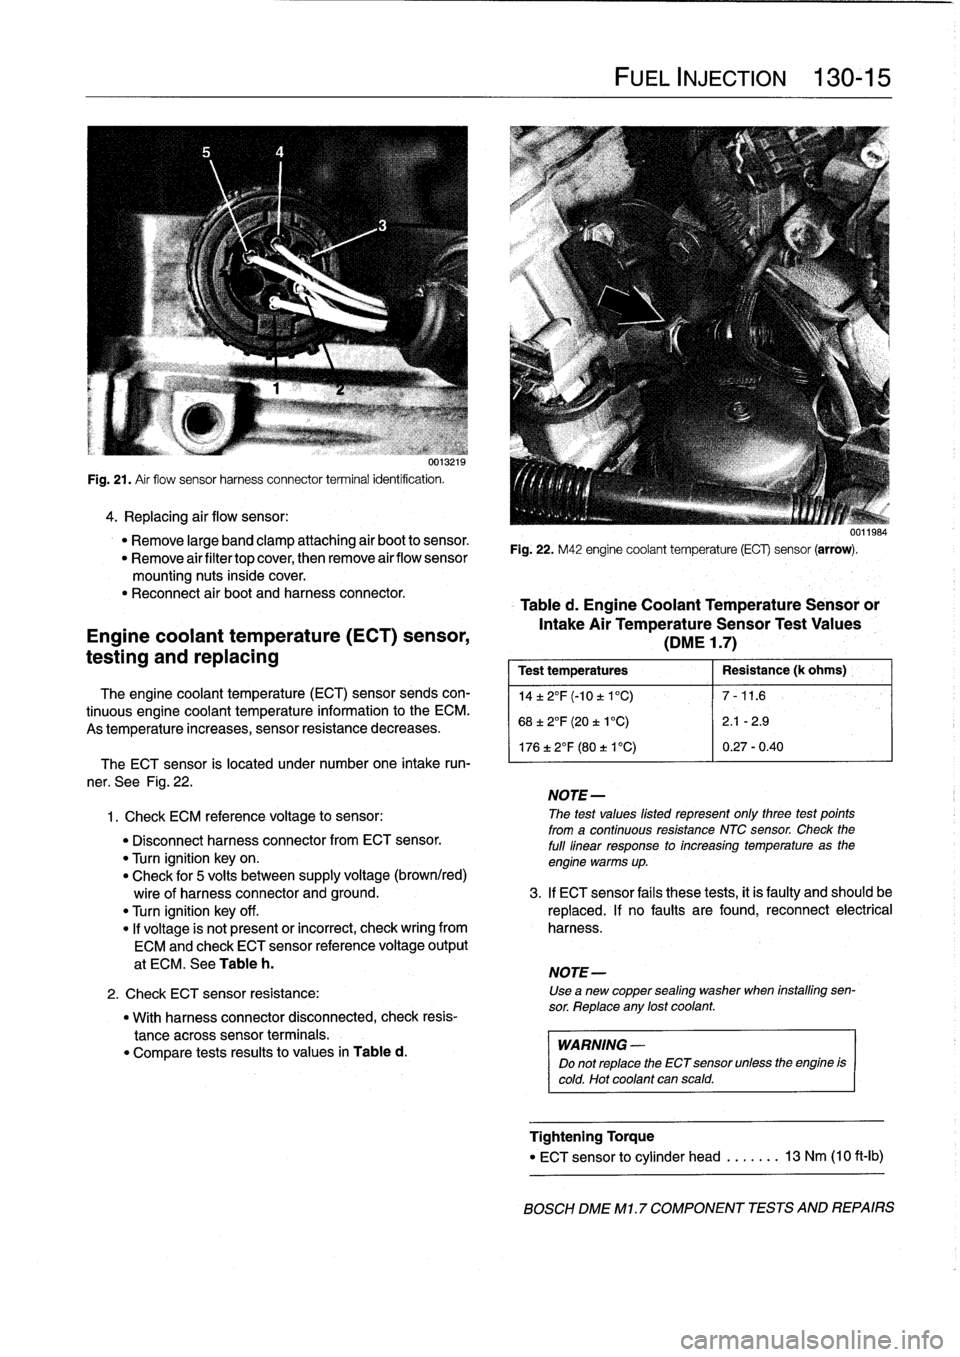 BMW 323i 1997 E36 Owners Guide u0
I
.[
Ia

Fig
.
21
.
Air
flow
sensor
harness
connector
terminal
identification
.

4
.
Replacing
air
flow
sensor
:

"
Remove
large
band
clamp
attaching
air
boot
to
sensor
.

"
Remove
airfiltertop
cov